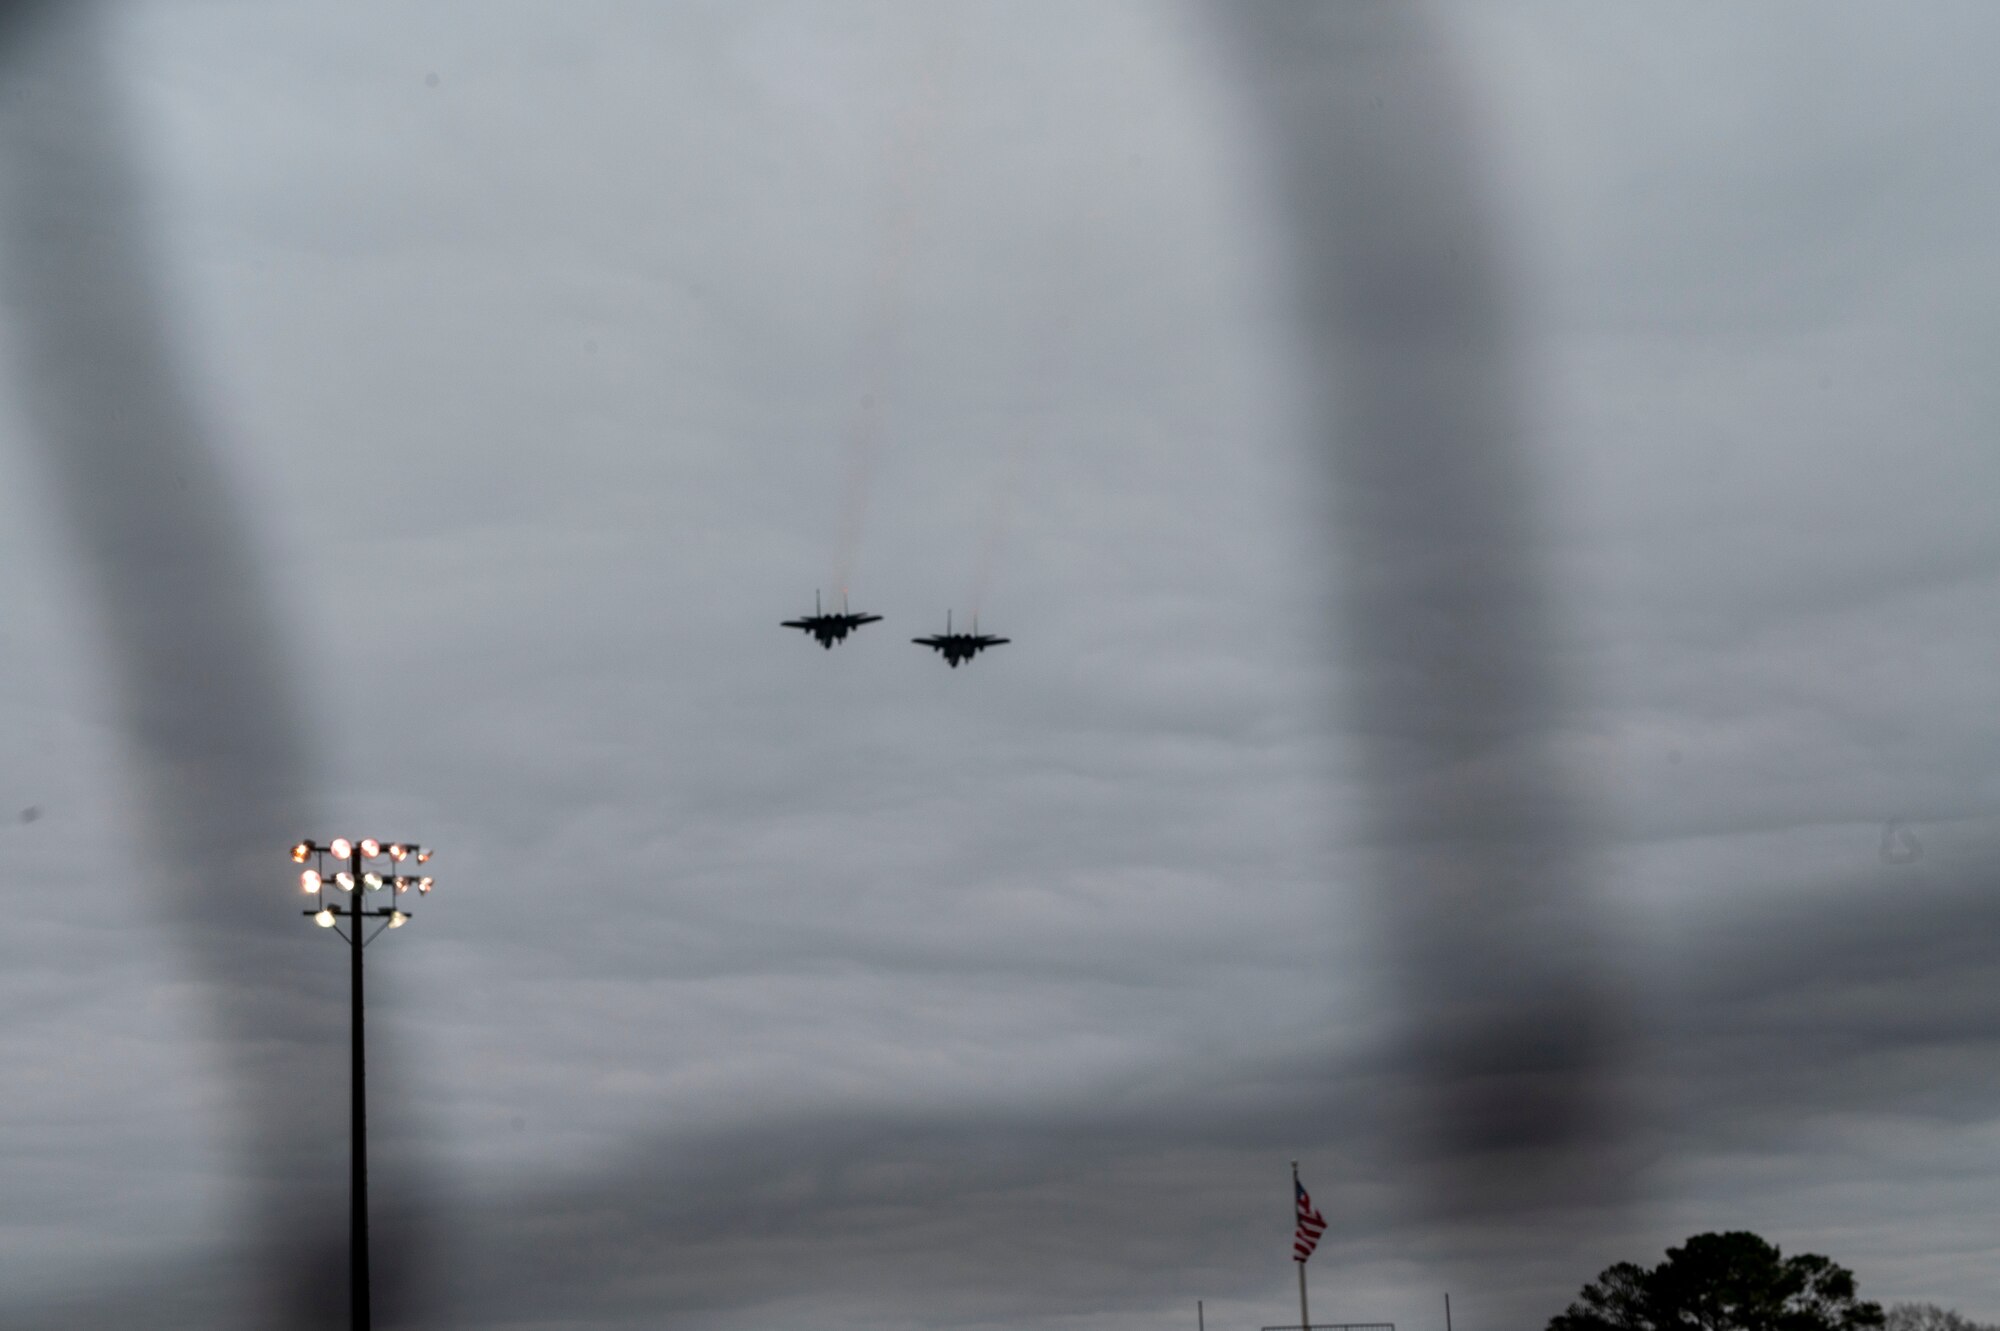 Two F-15E Strike Eagles assigned to Seymour Johnson Air Force Base fly over the 12th Annual Freedom Classic baseball series at Grainger Stadium in Kinston, North Carolina, Feb. 26, 2022. This was the second day that was part of a three-day series between the U.S. Air Force Academy and the U.S. Naval Academy. (U.S. Air Force photo by Airman 1st Class Kevin Holloway)